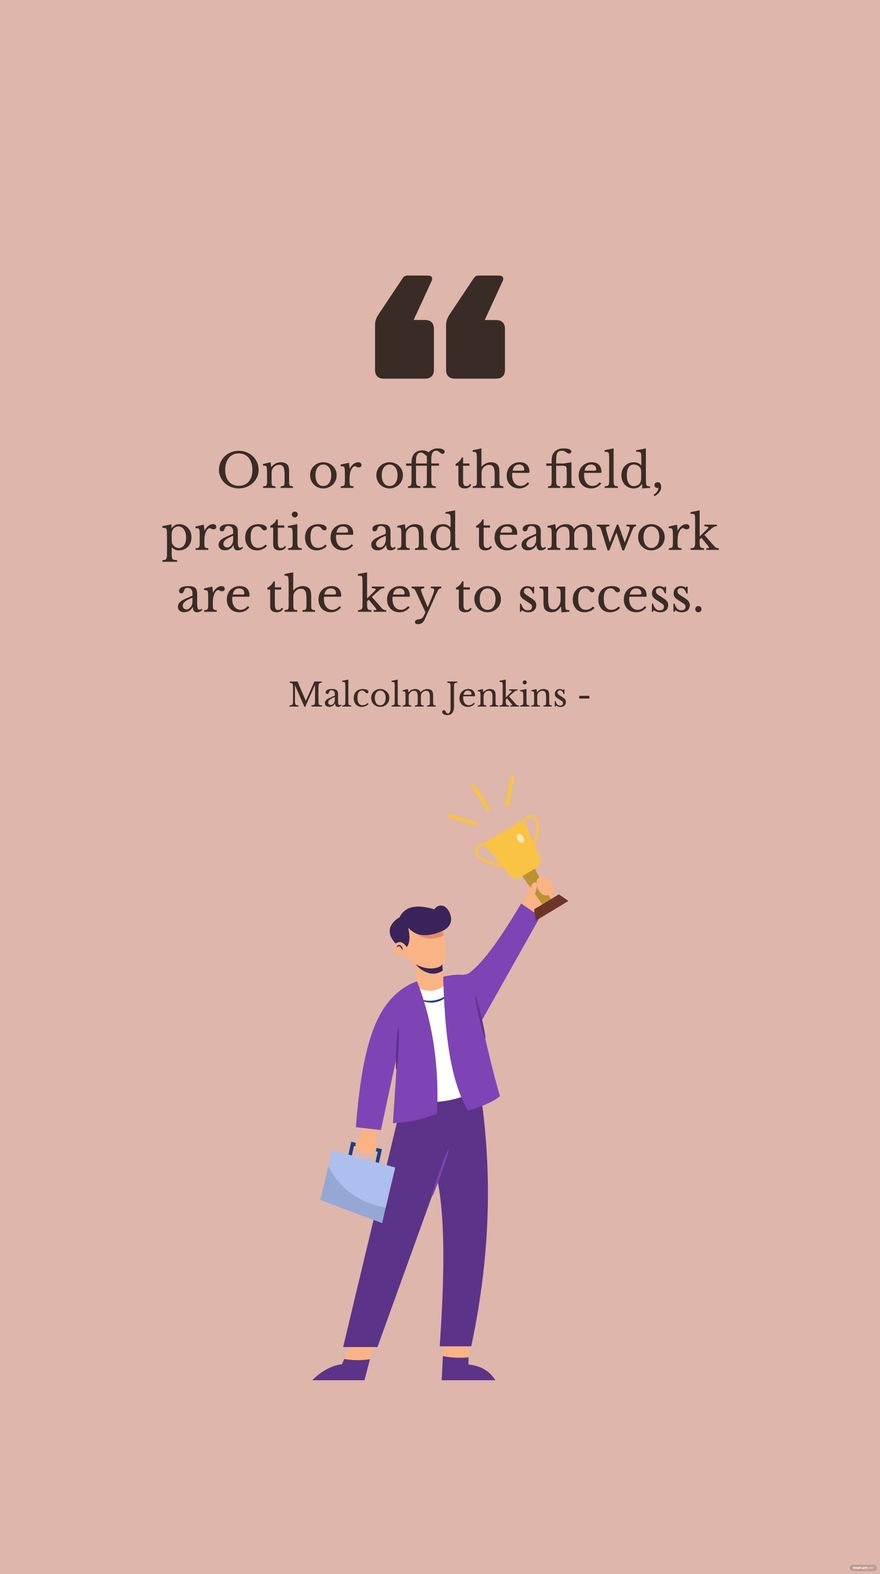 Free Malcolm Jenkins - On or off the field, practice and teamwork are the key to success. in JPG